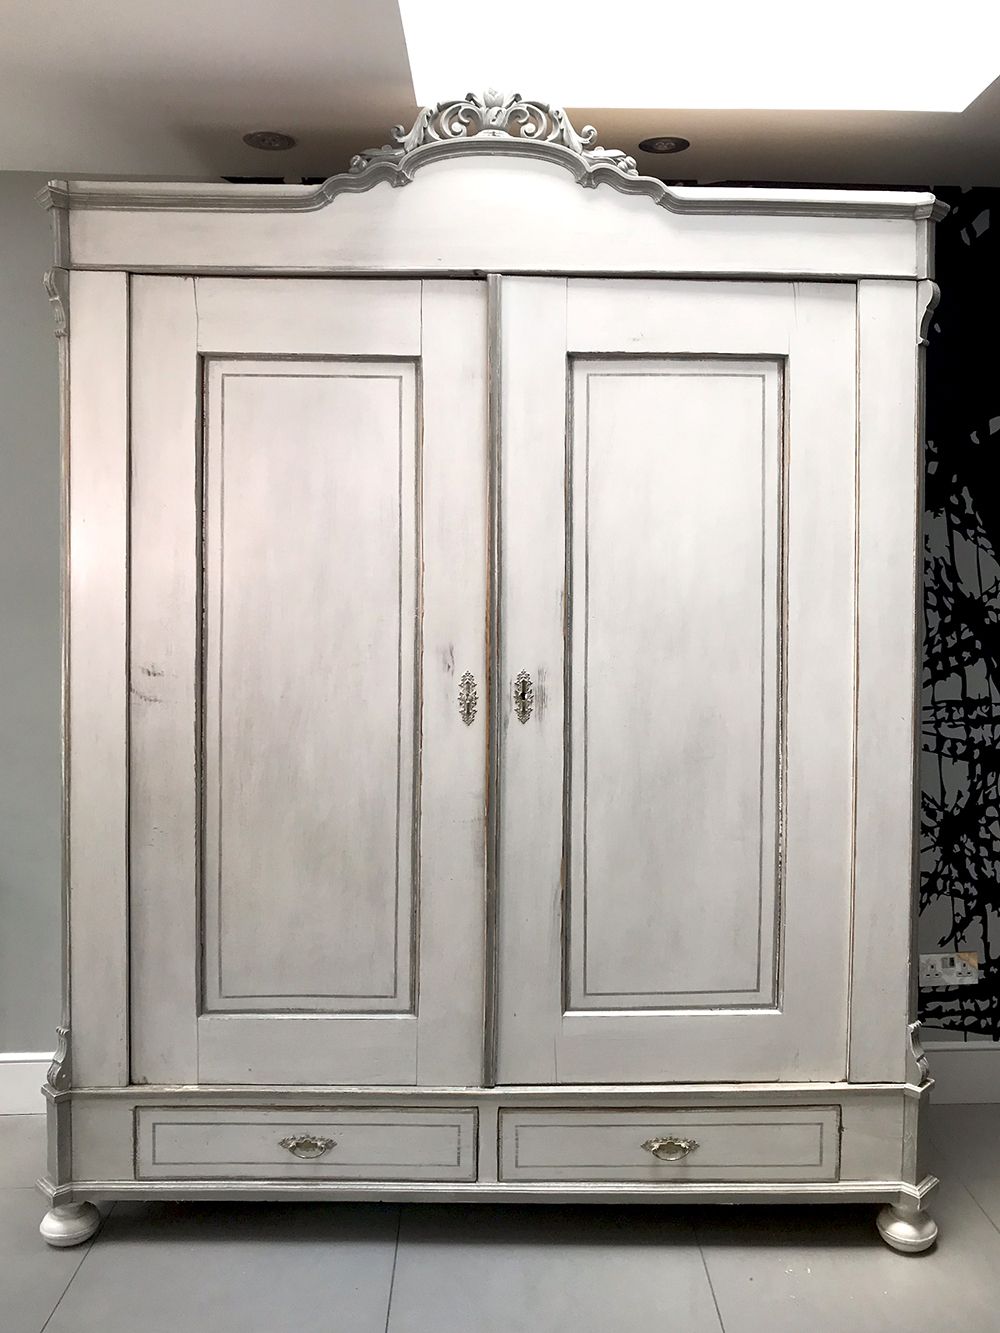 Antique French Painted Armoire – Sold | Napoleonrockefeller – Vintage And  Retro Furniture, Bespoke Hand Crafted Chairs And Seating In White Vintage Wardrobes (View 13 of 15)